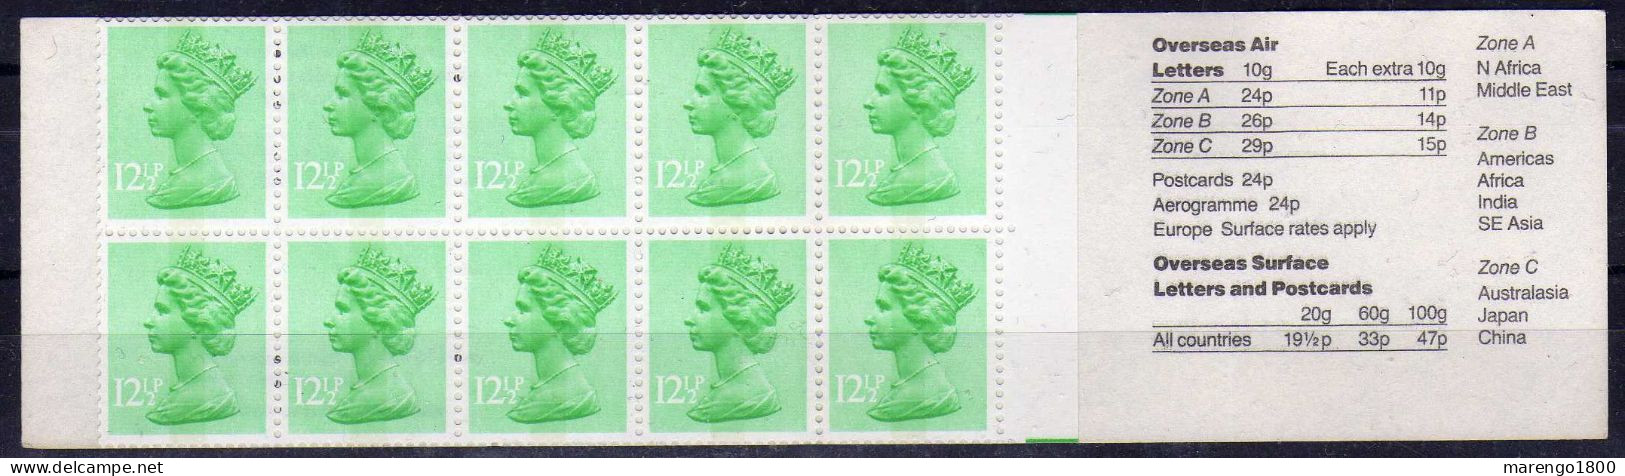 GB Booklet Museums Belfast 1982 (R) - (M1) - Carnets